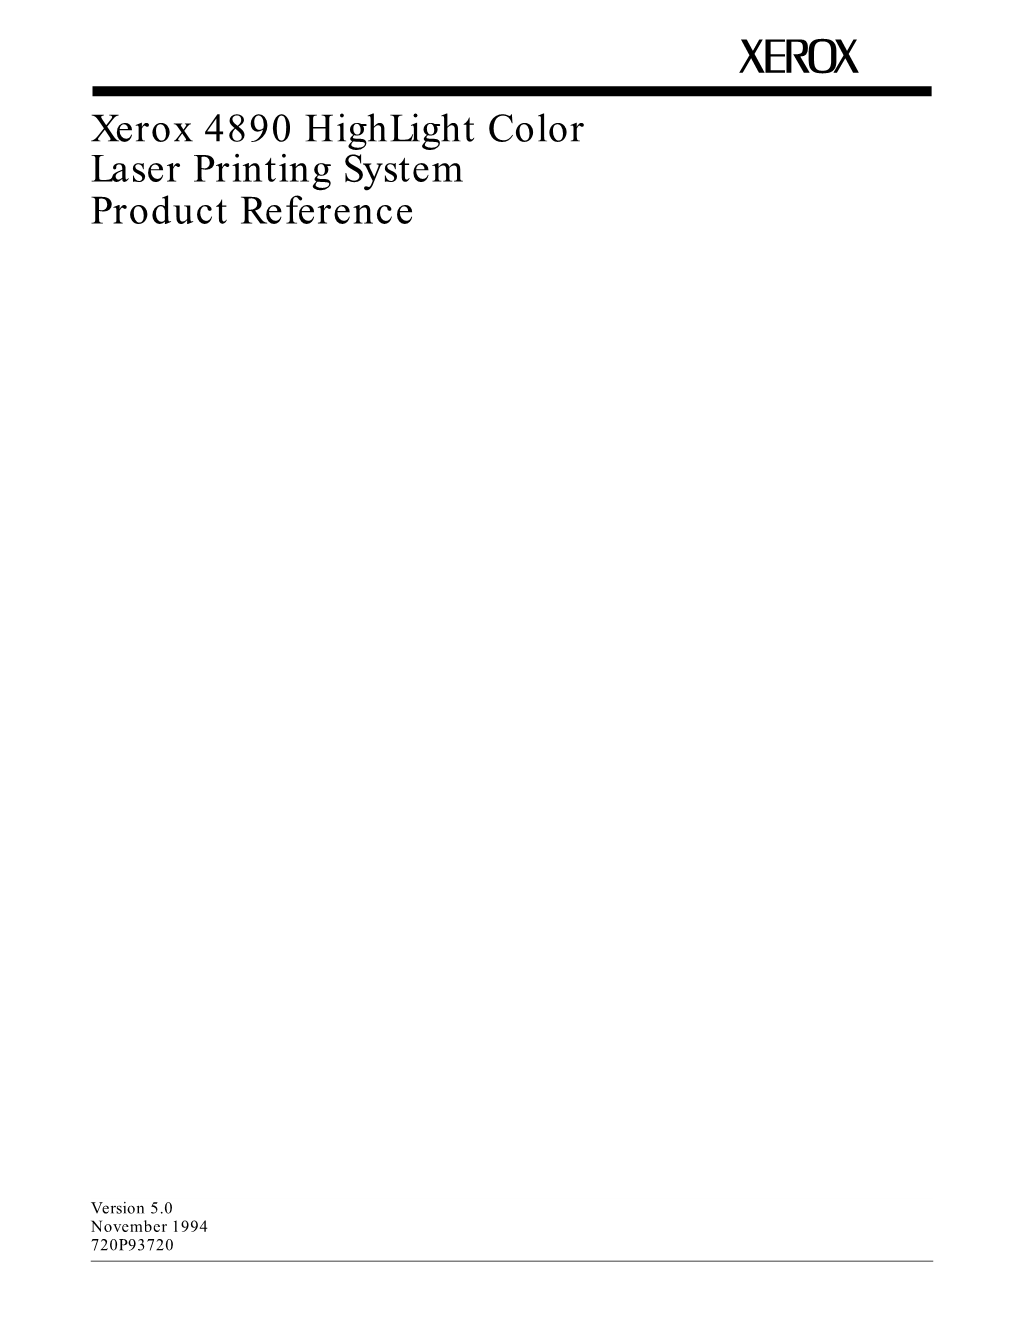 Xerox 4890 Highlight Color Laser Printing System Product Reference